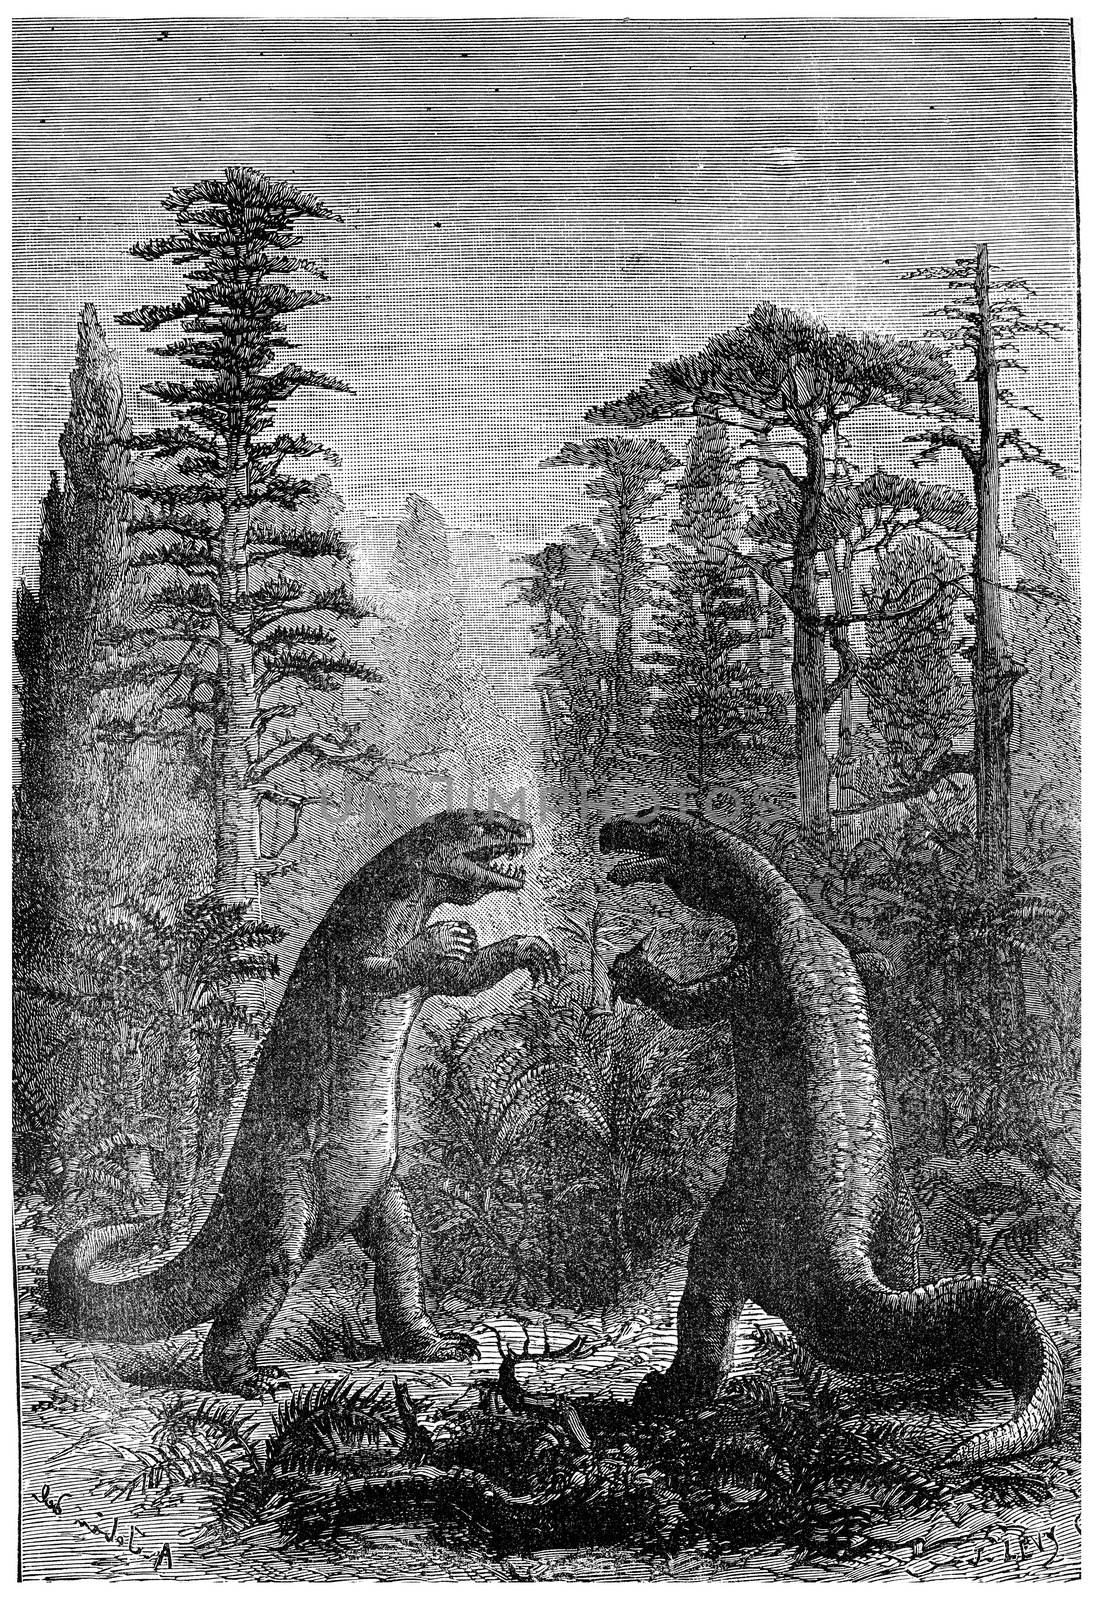 Iguanodon and Megalosaurus in a forest of ferns, cycads and conifers, vintage engraved illustration. Earth before man – 1886.